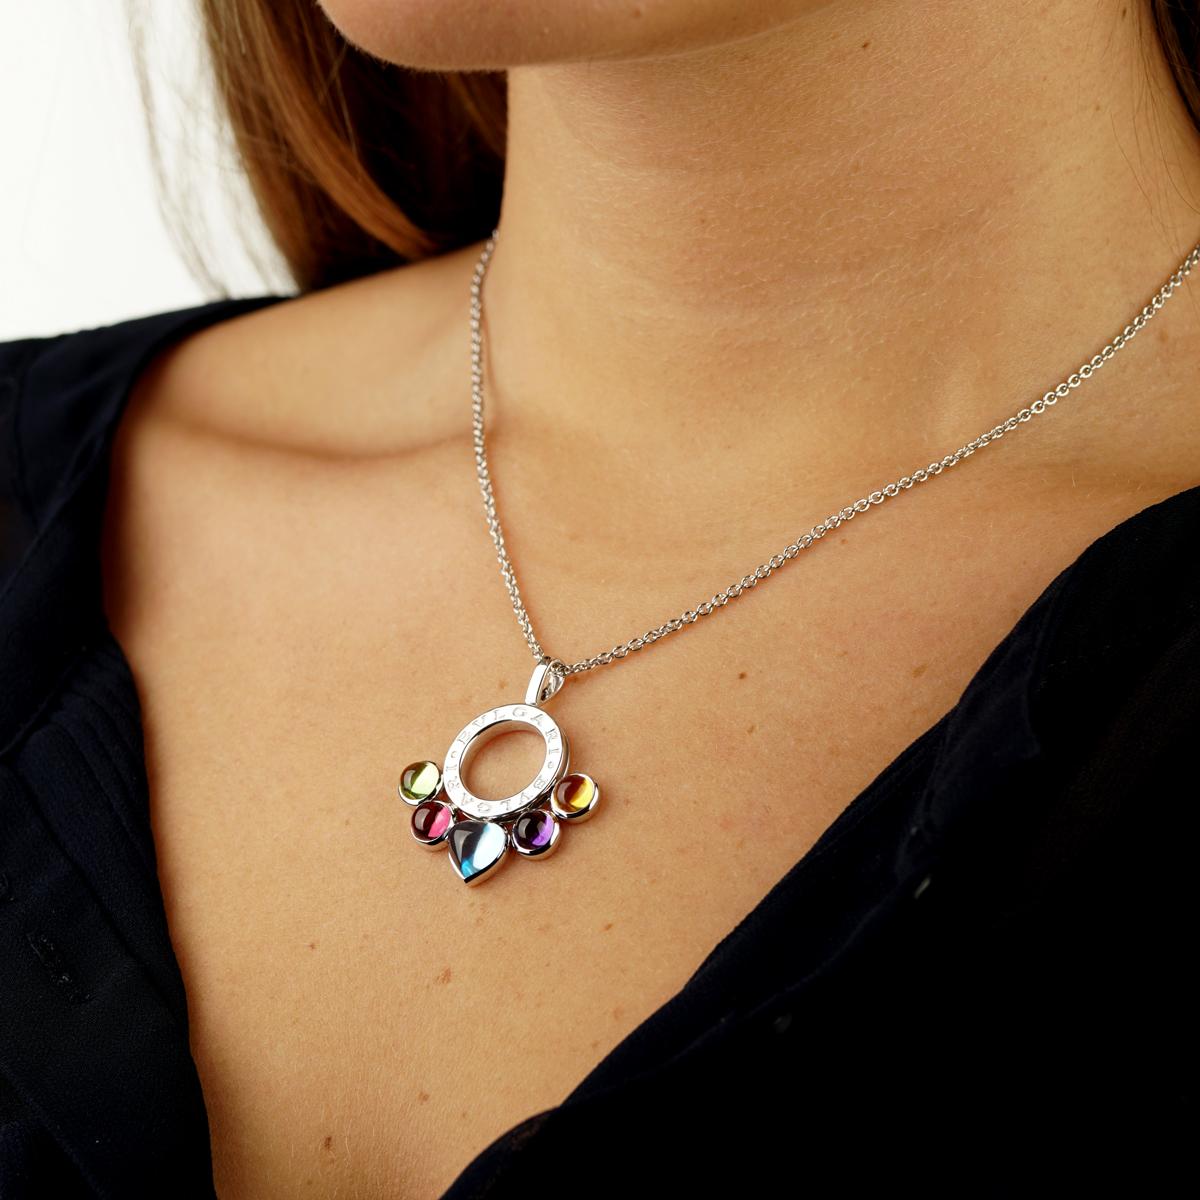 A fabulous Bulgari Allegra necklace featuring 5 multicolored gemstones set in 18k white gold. The 5 gemstones are bezel set and freely swing. The pendant is suspended by a Bulgari 16